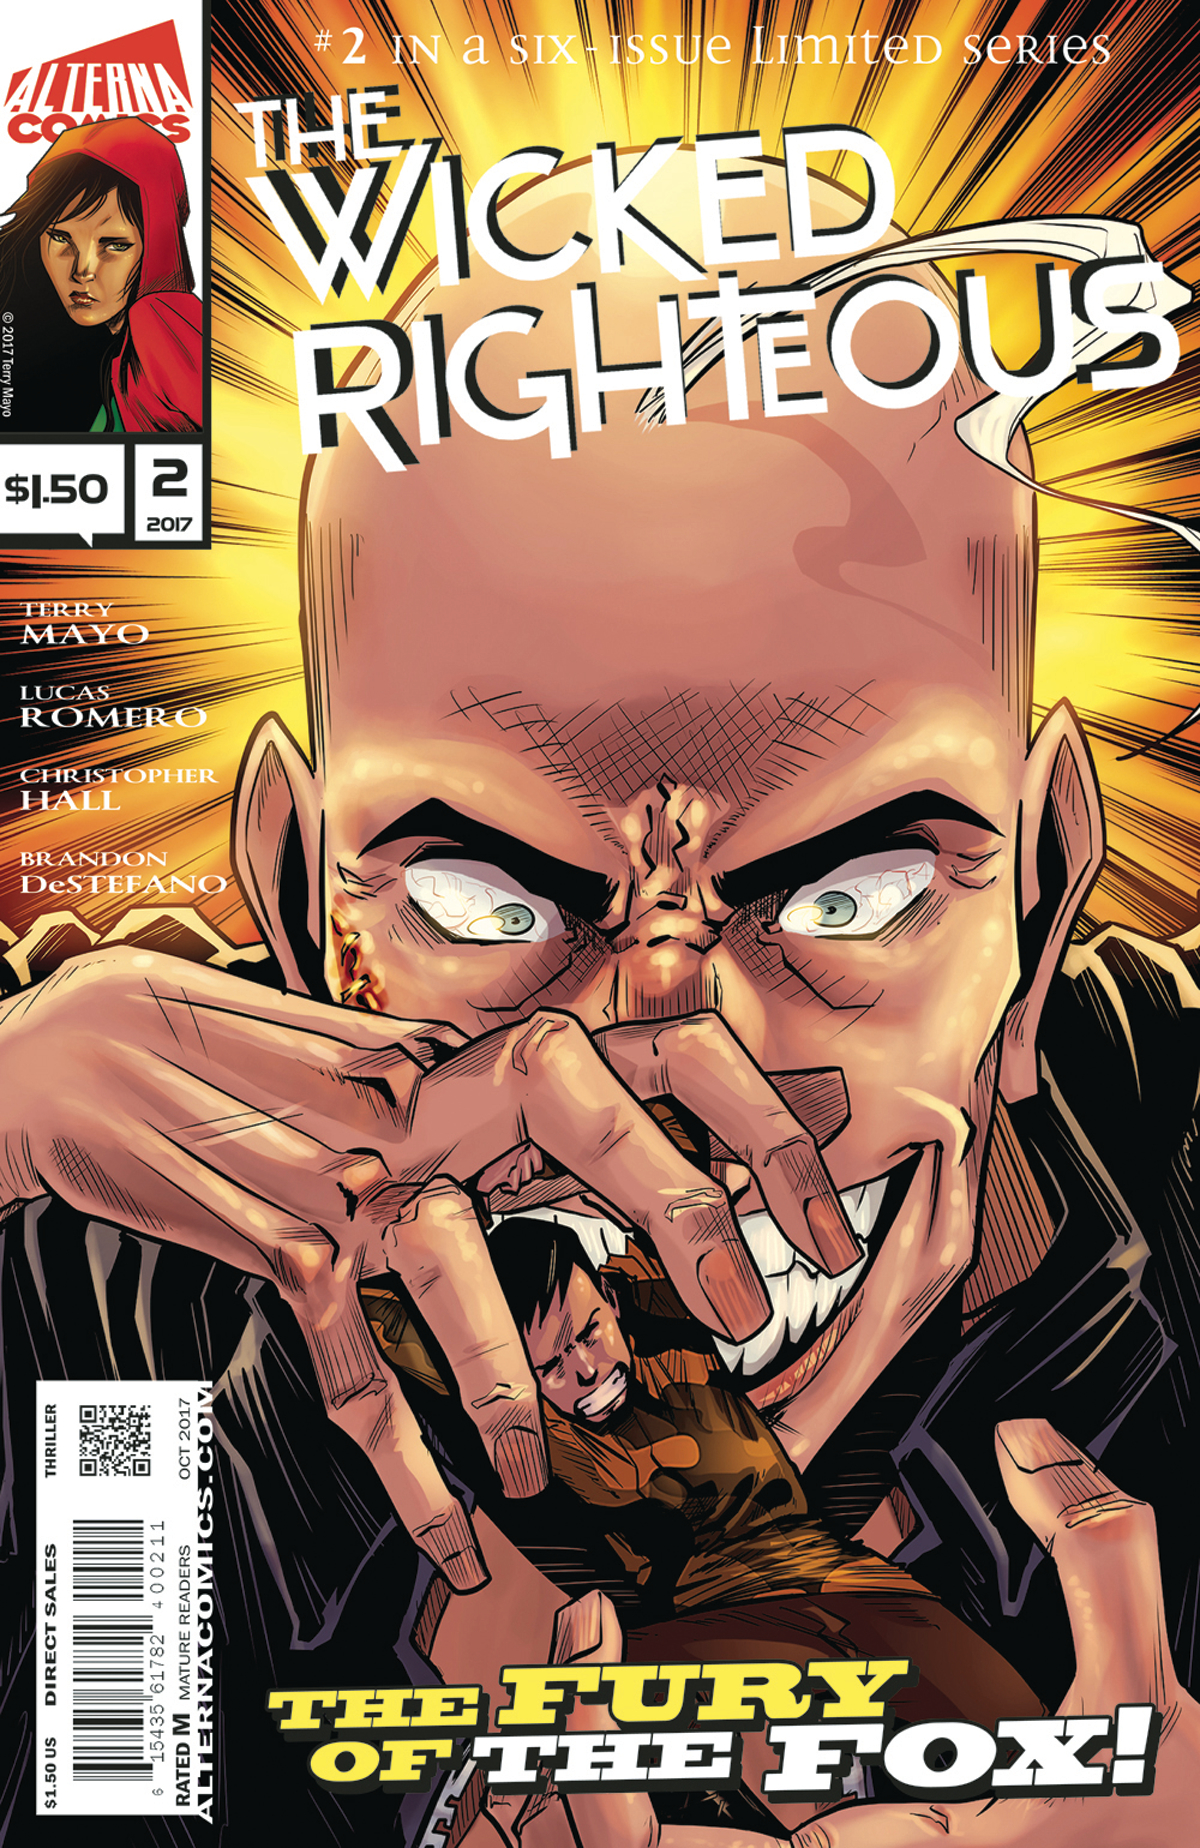 WICKED RIGHTEOUS #2 (OF 6) (MR)